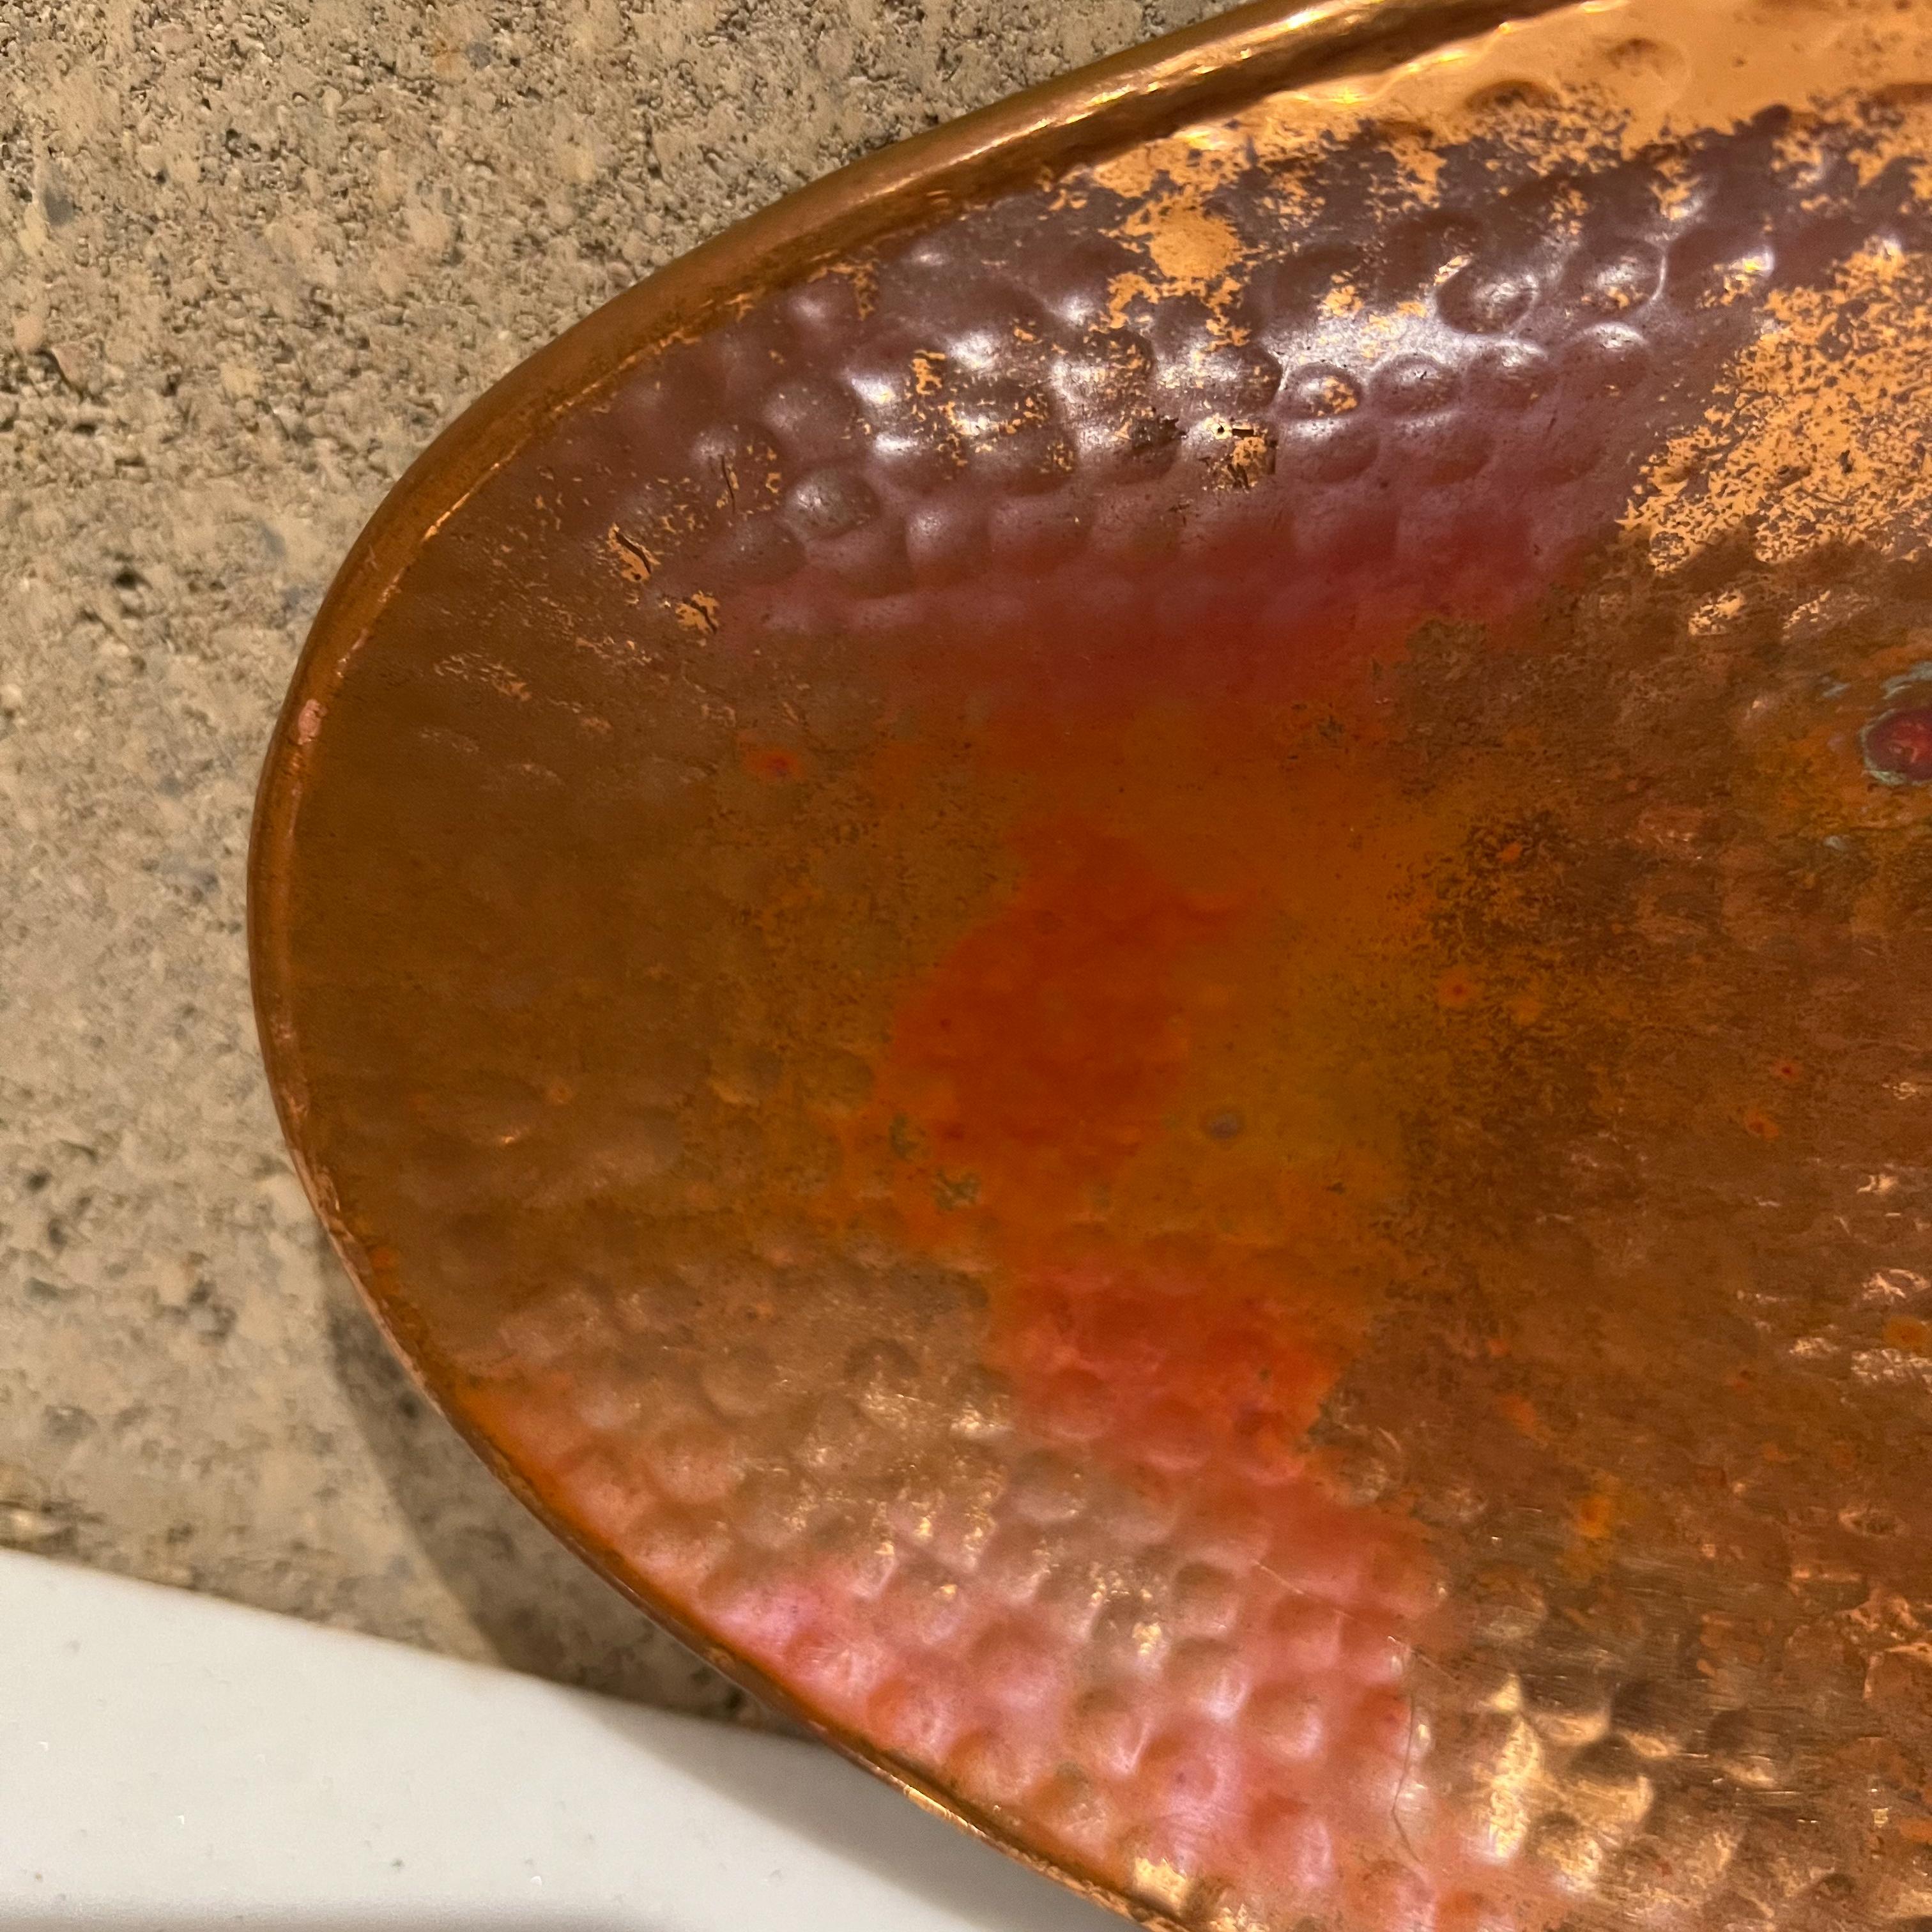 1970s vintage Modern hammered copper dish tray platter oval design
Bread Cheese serving dish
Measures: 1.63 tall x 7.38 depth x 20 width
Preowned unrestored vintage condition.
See images please.
   